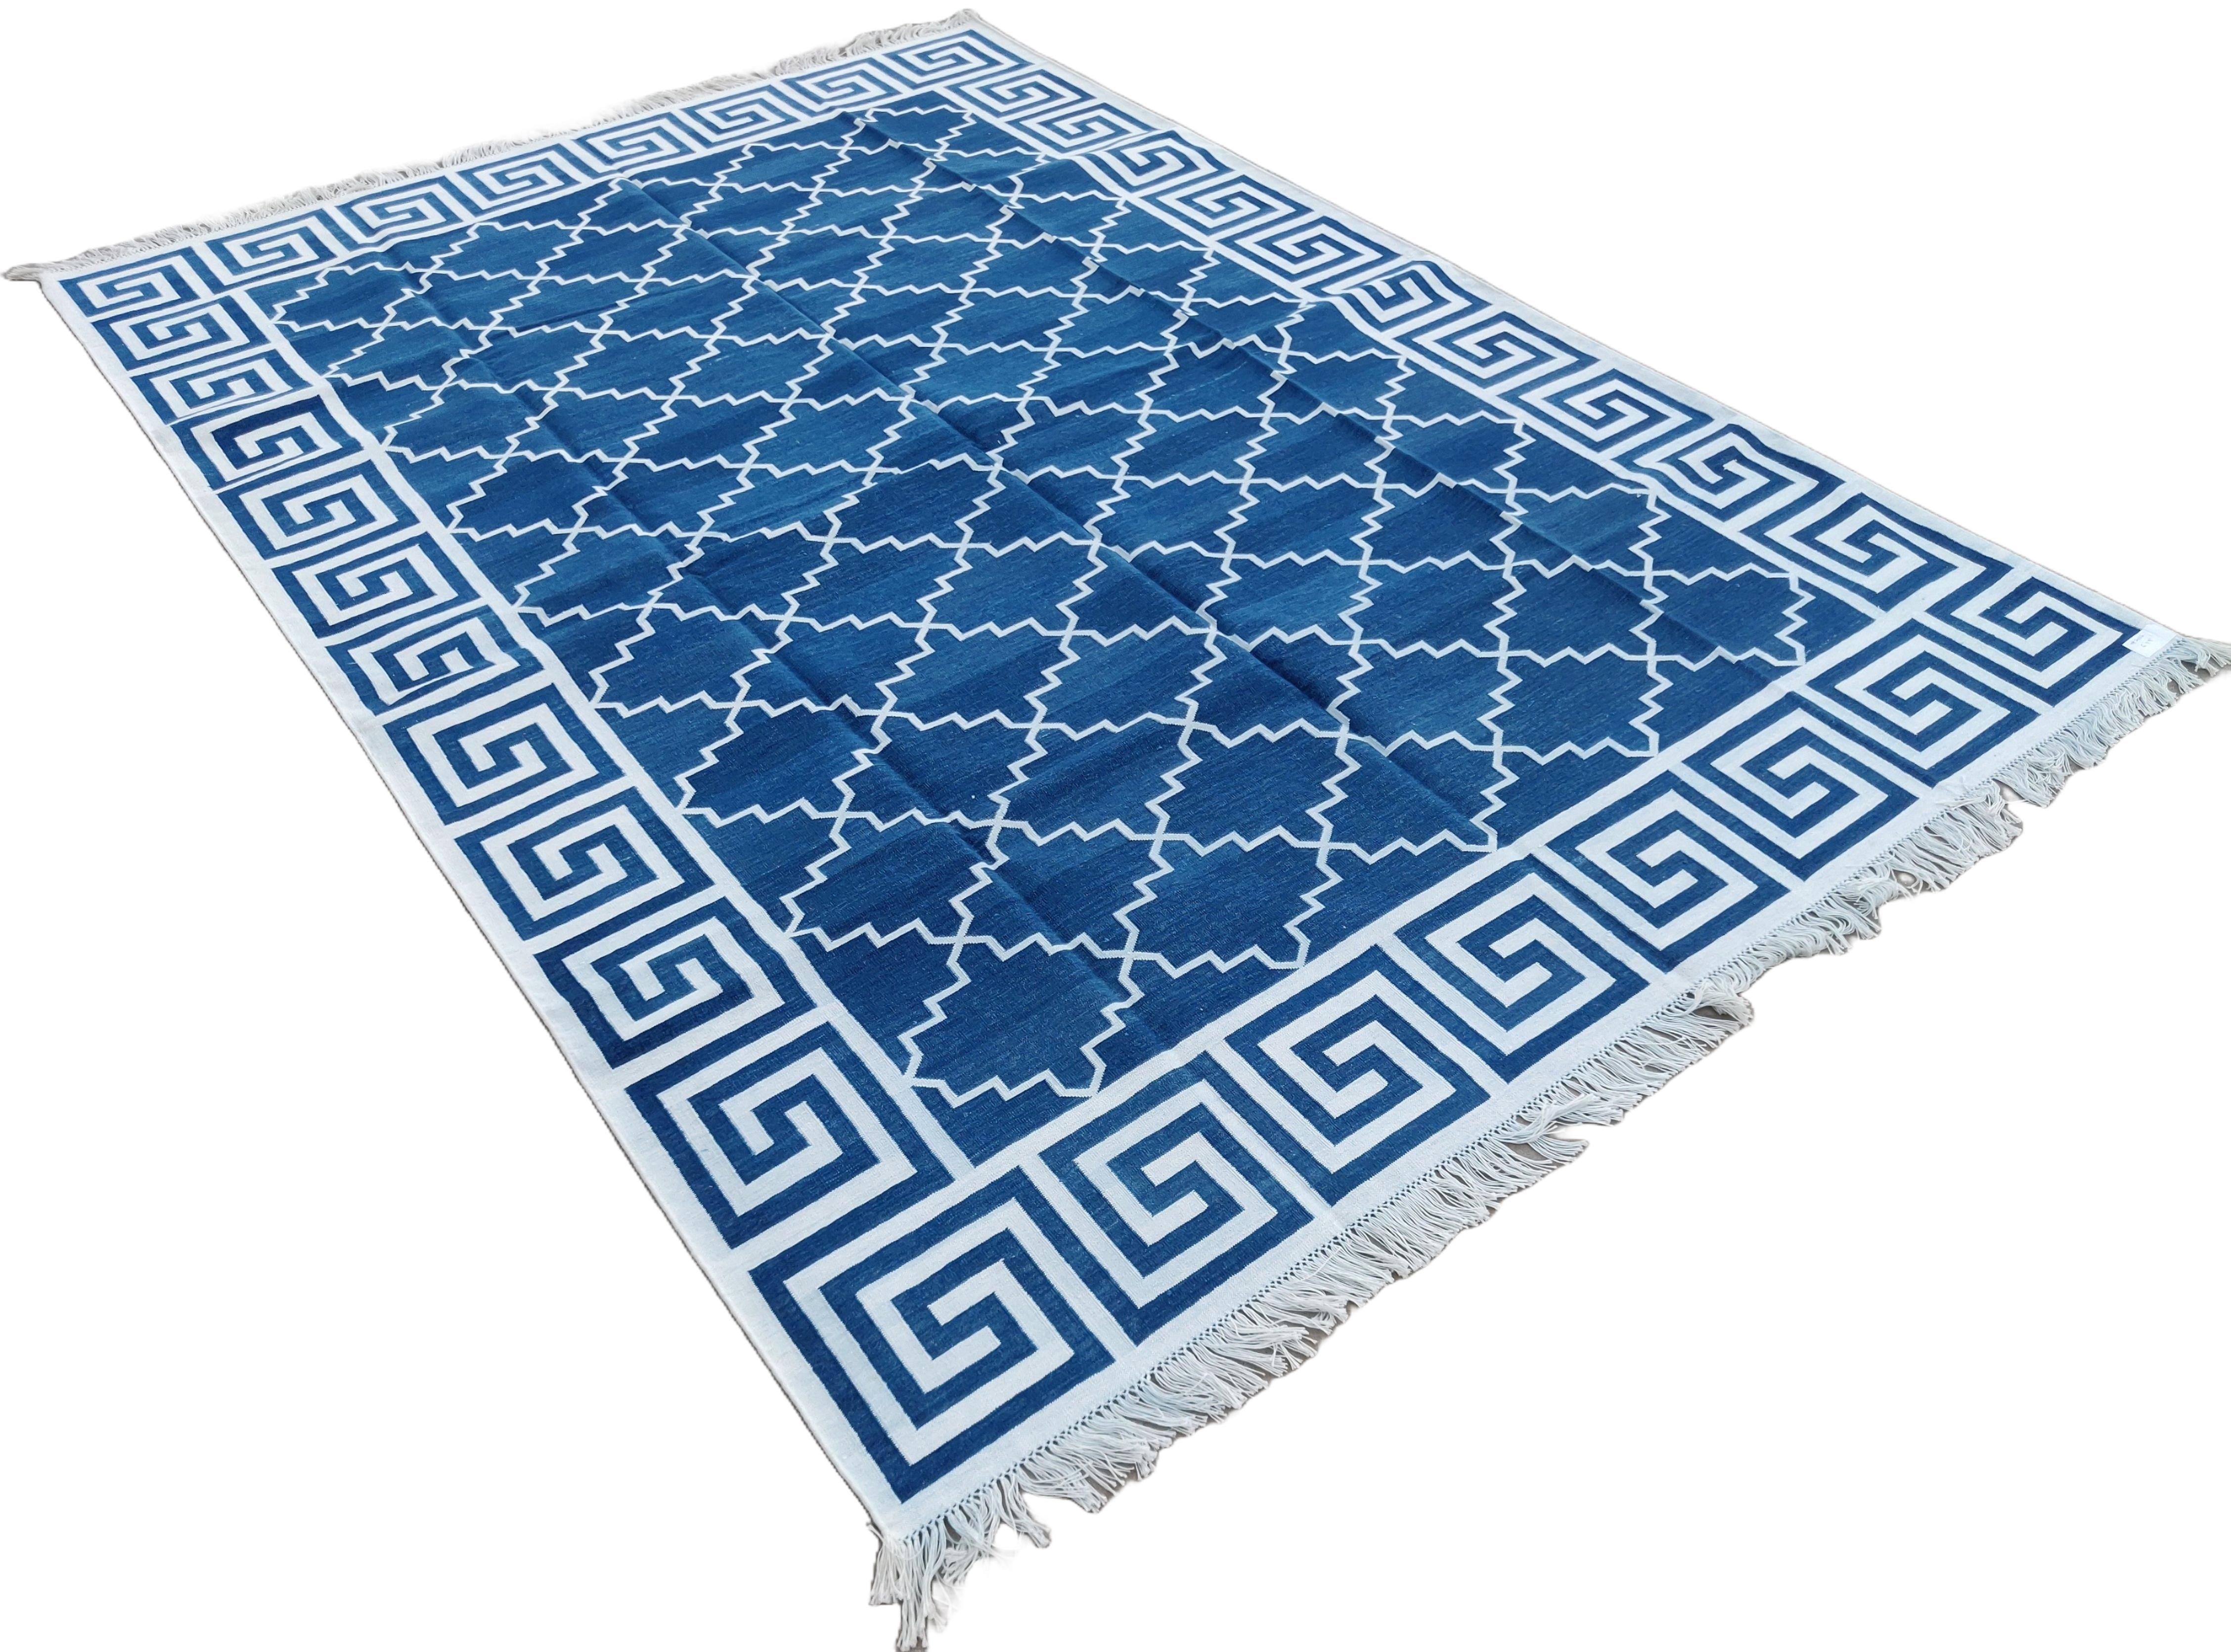 Cotton Vegetable Dyed Indigo Blue And White Geometric Indian Rug-6'x9' 
These special flat-weave dhurries are hand-woven with 15 ply 100% cotton yarn. Due to the special manufacturing techniques used to create our rugs, the size and color of each